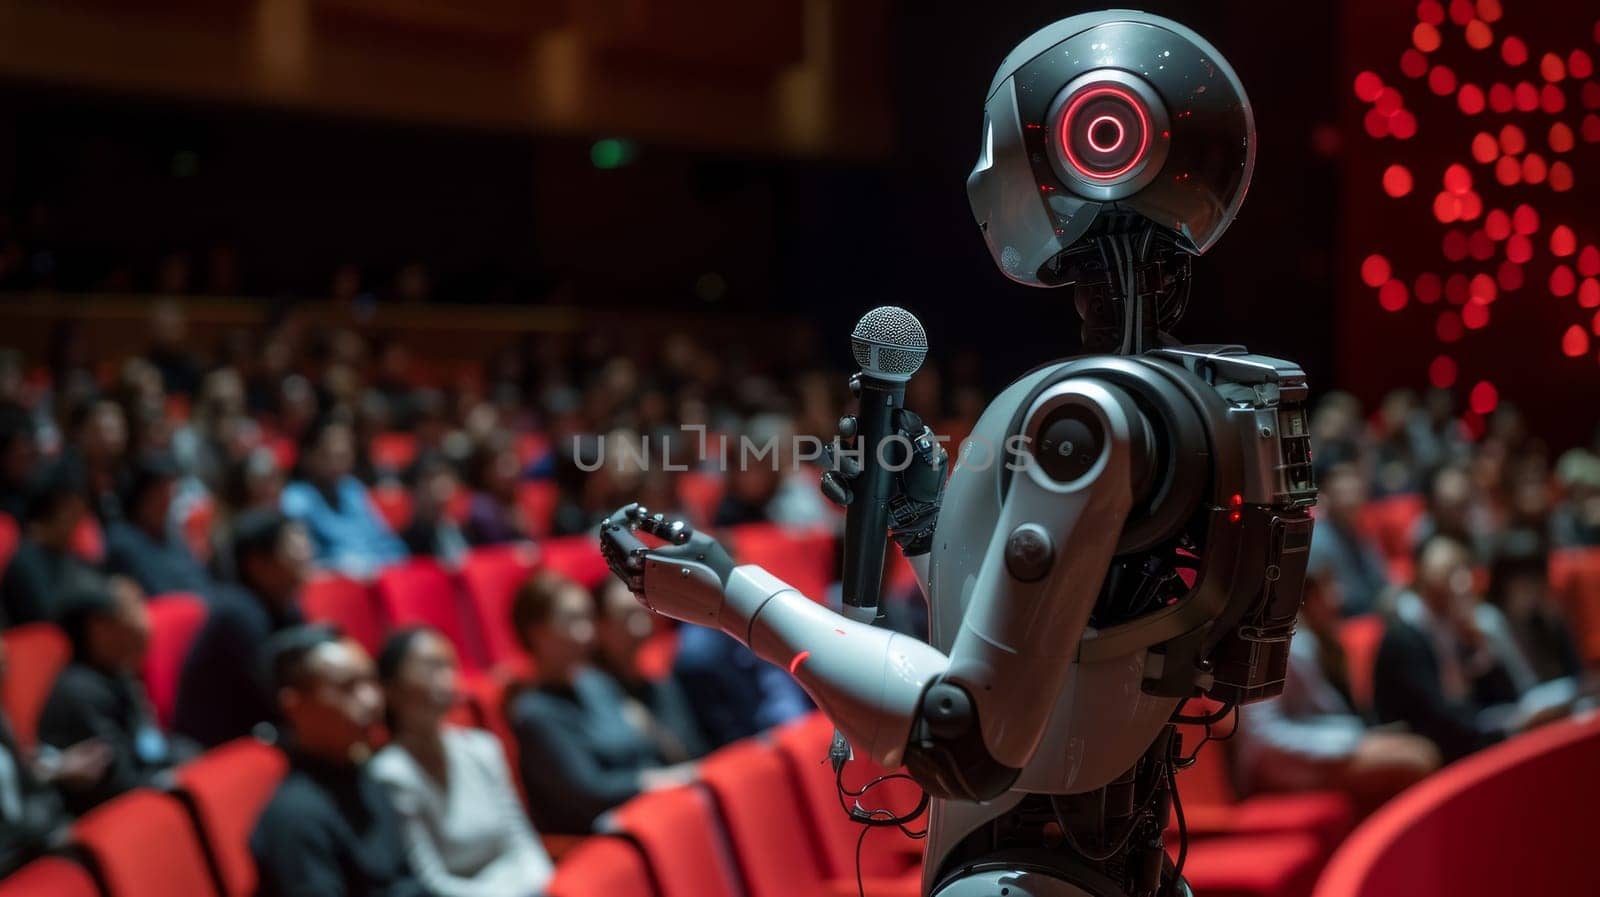 A robot is standing in front of a crowd of people, holding a microphone. The robot is wearing a red jacket and has a red microphone. The robot is giving a speech, and the audience is watching intently